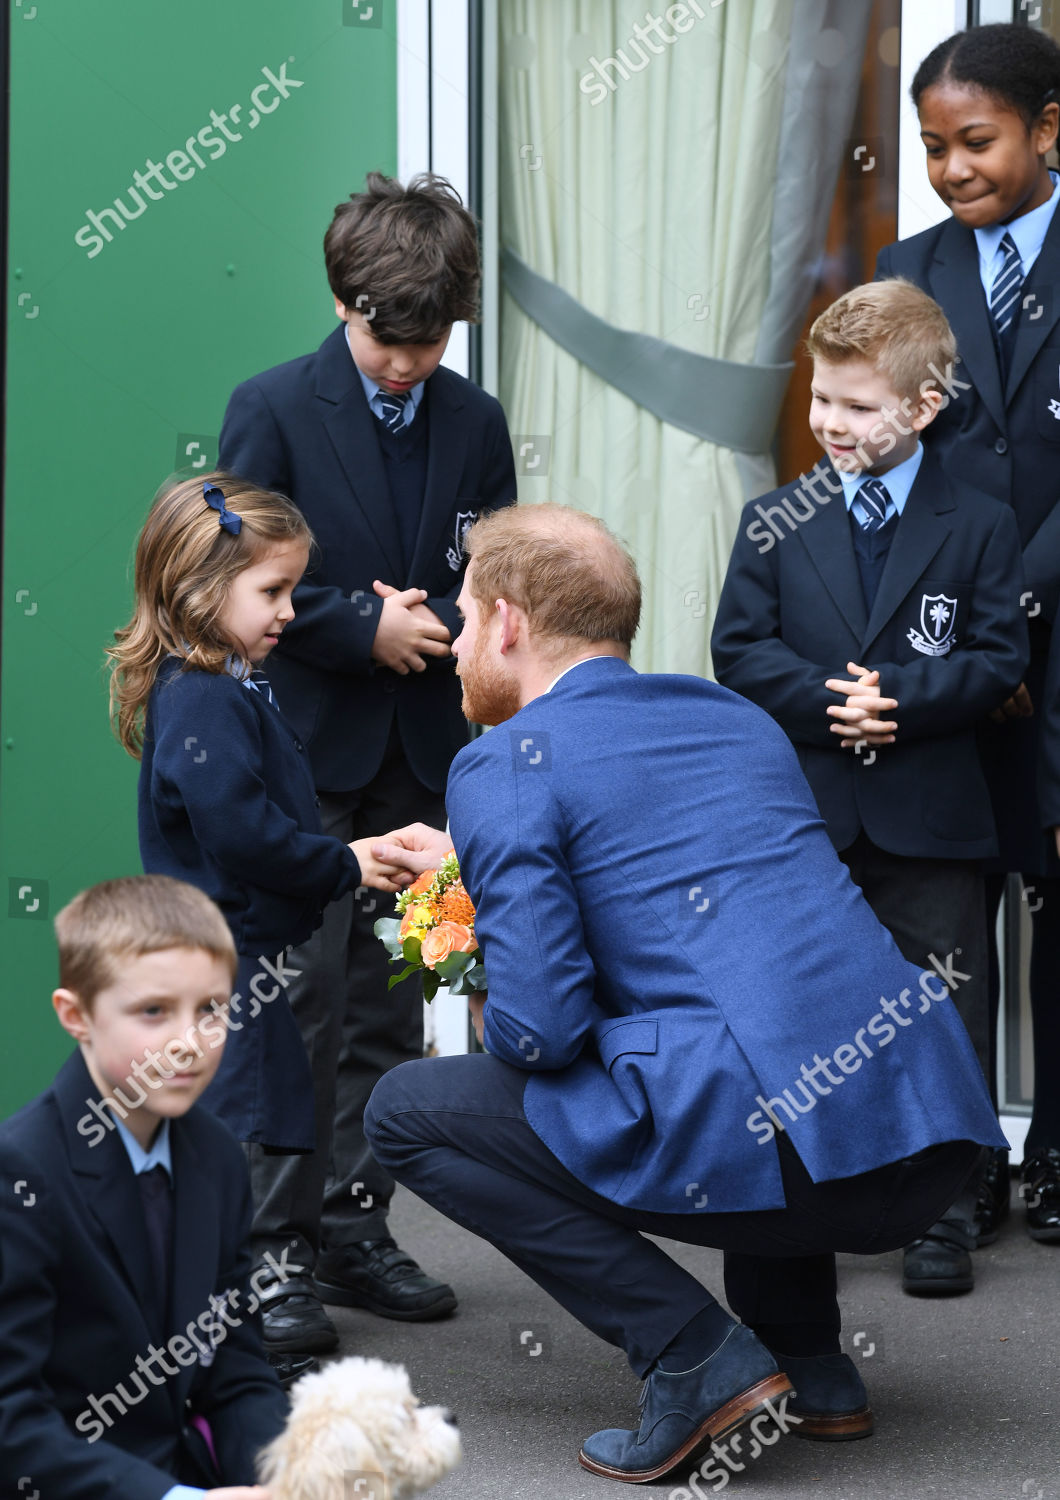 prince-harry-visits-st-vincents-catholic-primary-school-for-commonwealth-canopy-and-woodland-trust-tree-planting-ceremony-london-uk-shutterstock-editorial-10160984aa.jpg